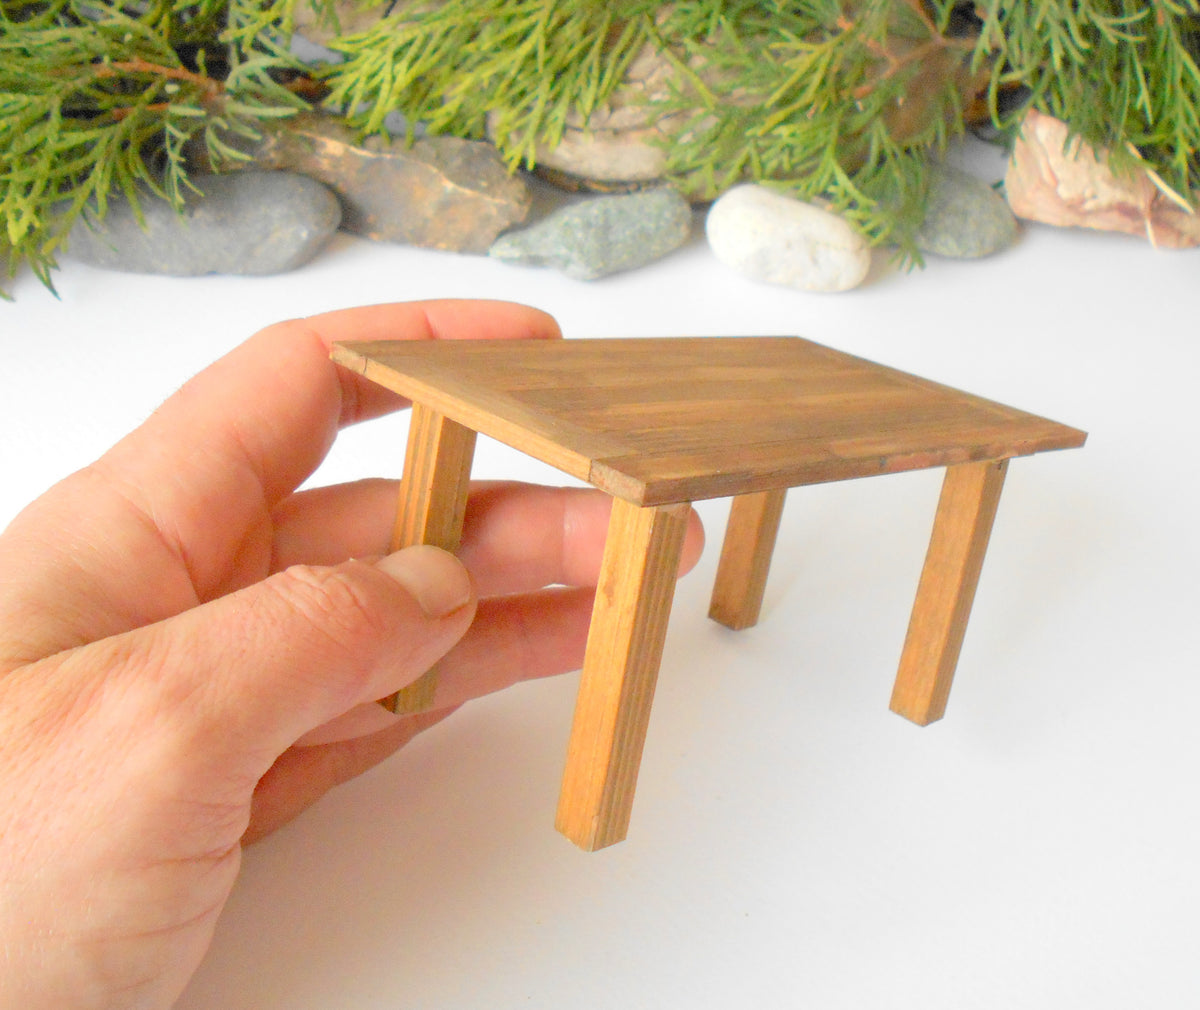 This is a handmade miniature dining or kitchen table on a&amp;nbsp;&lt;span data-mce-fragment=&quot;1&quot;&gt;1/12&lt;/span&gt;&lt;span data-mce-fragment=&quot;1&quot;&gt;th&lt;/span&gt; scale that is suitable for 6 mini chairs on a 1/12th scale. I handmade this table on order with real pine wood boards and beams and with water-based eco-friendly glue. I have stained that table with Italian eco-friendly mordant in light brown.